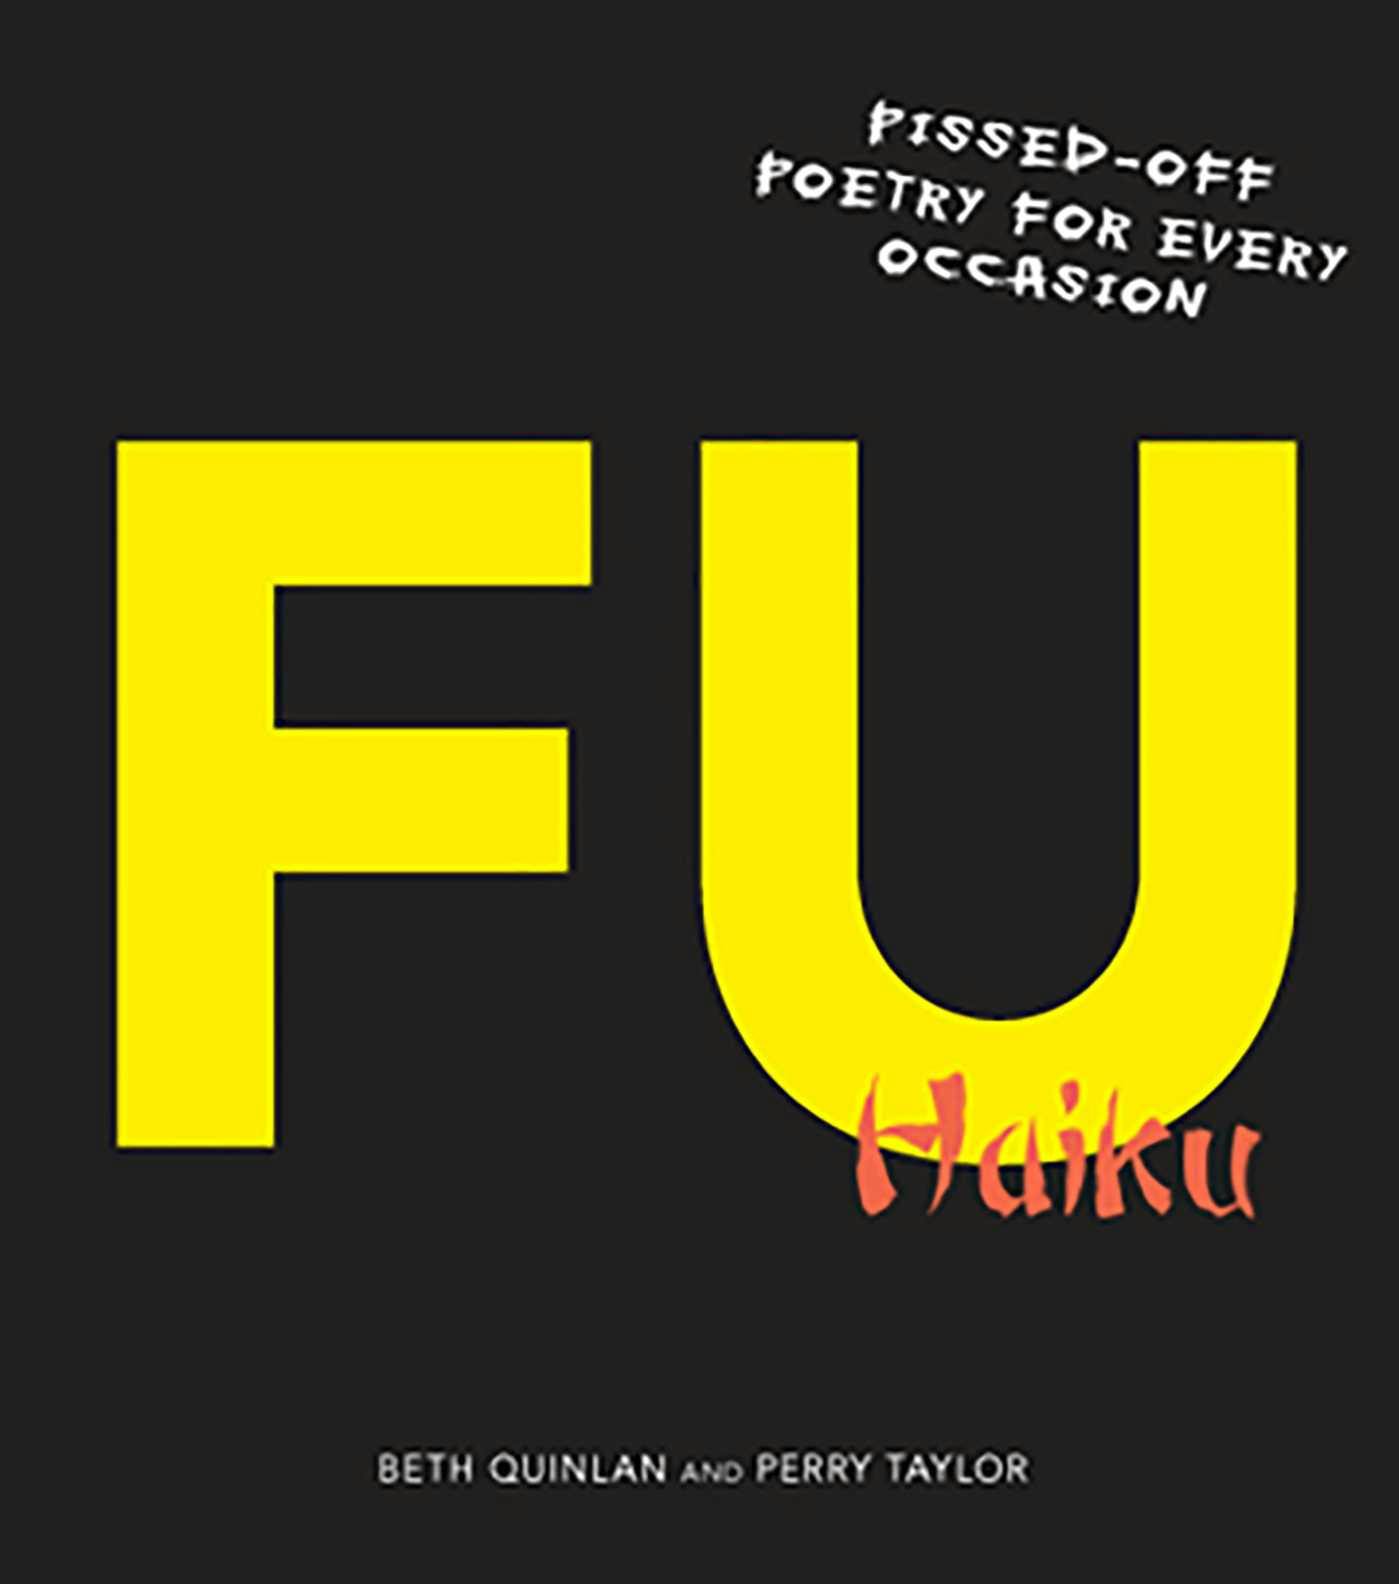 F U Haiku: Pissed-Off Poetry for Every Occasion - Perry Taylor, Beth Quinlan